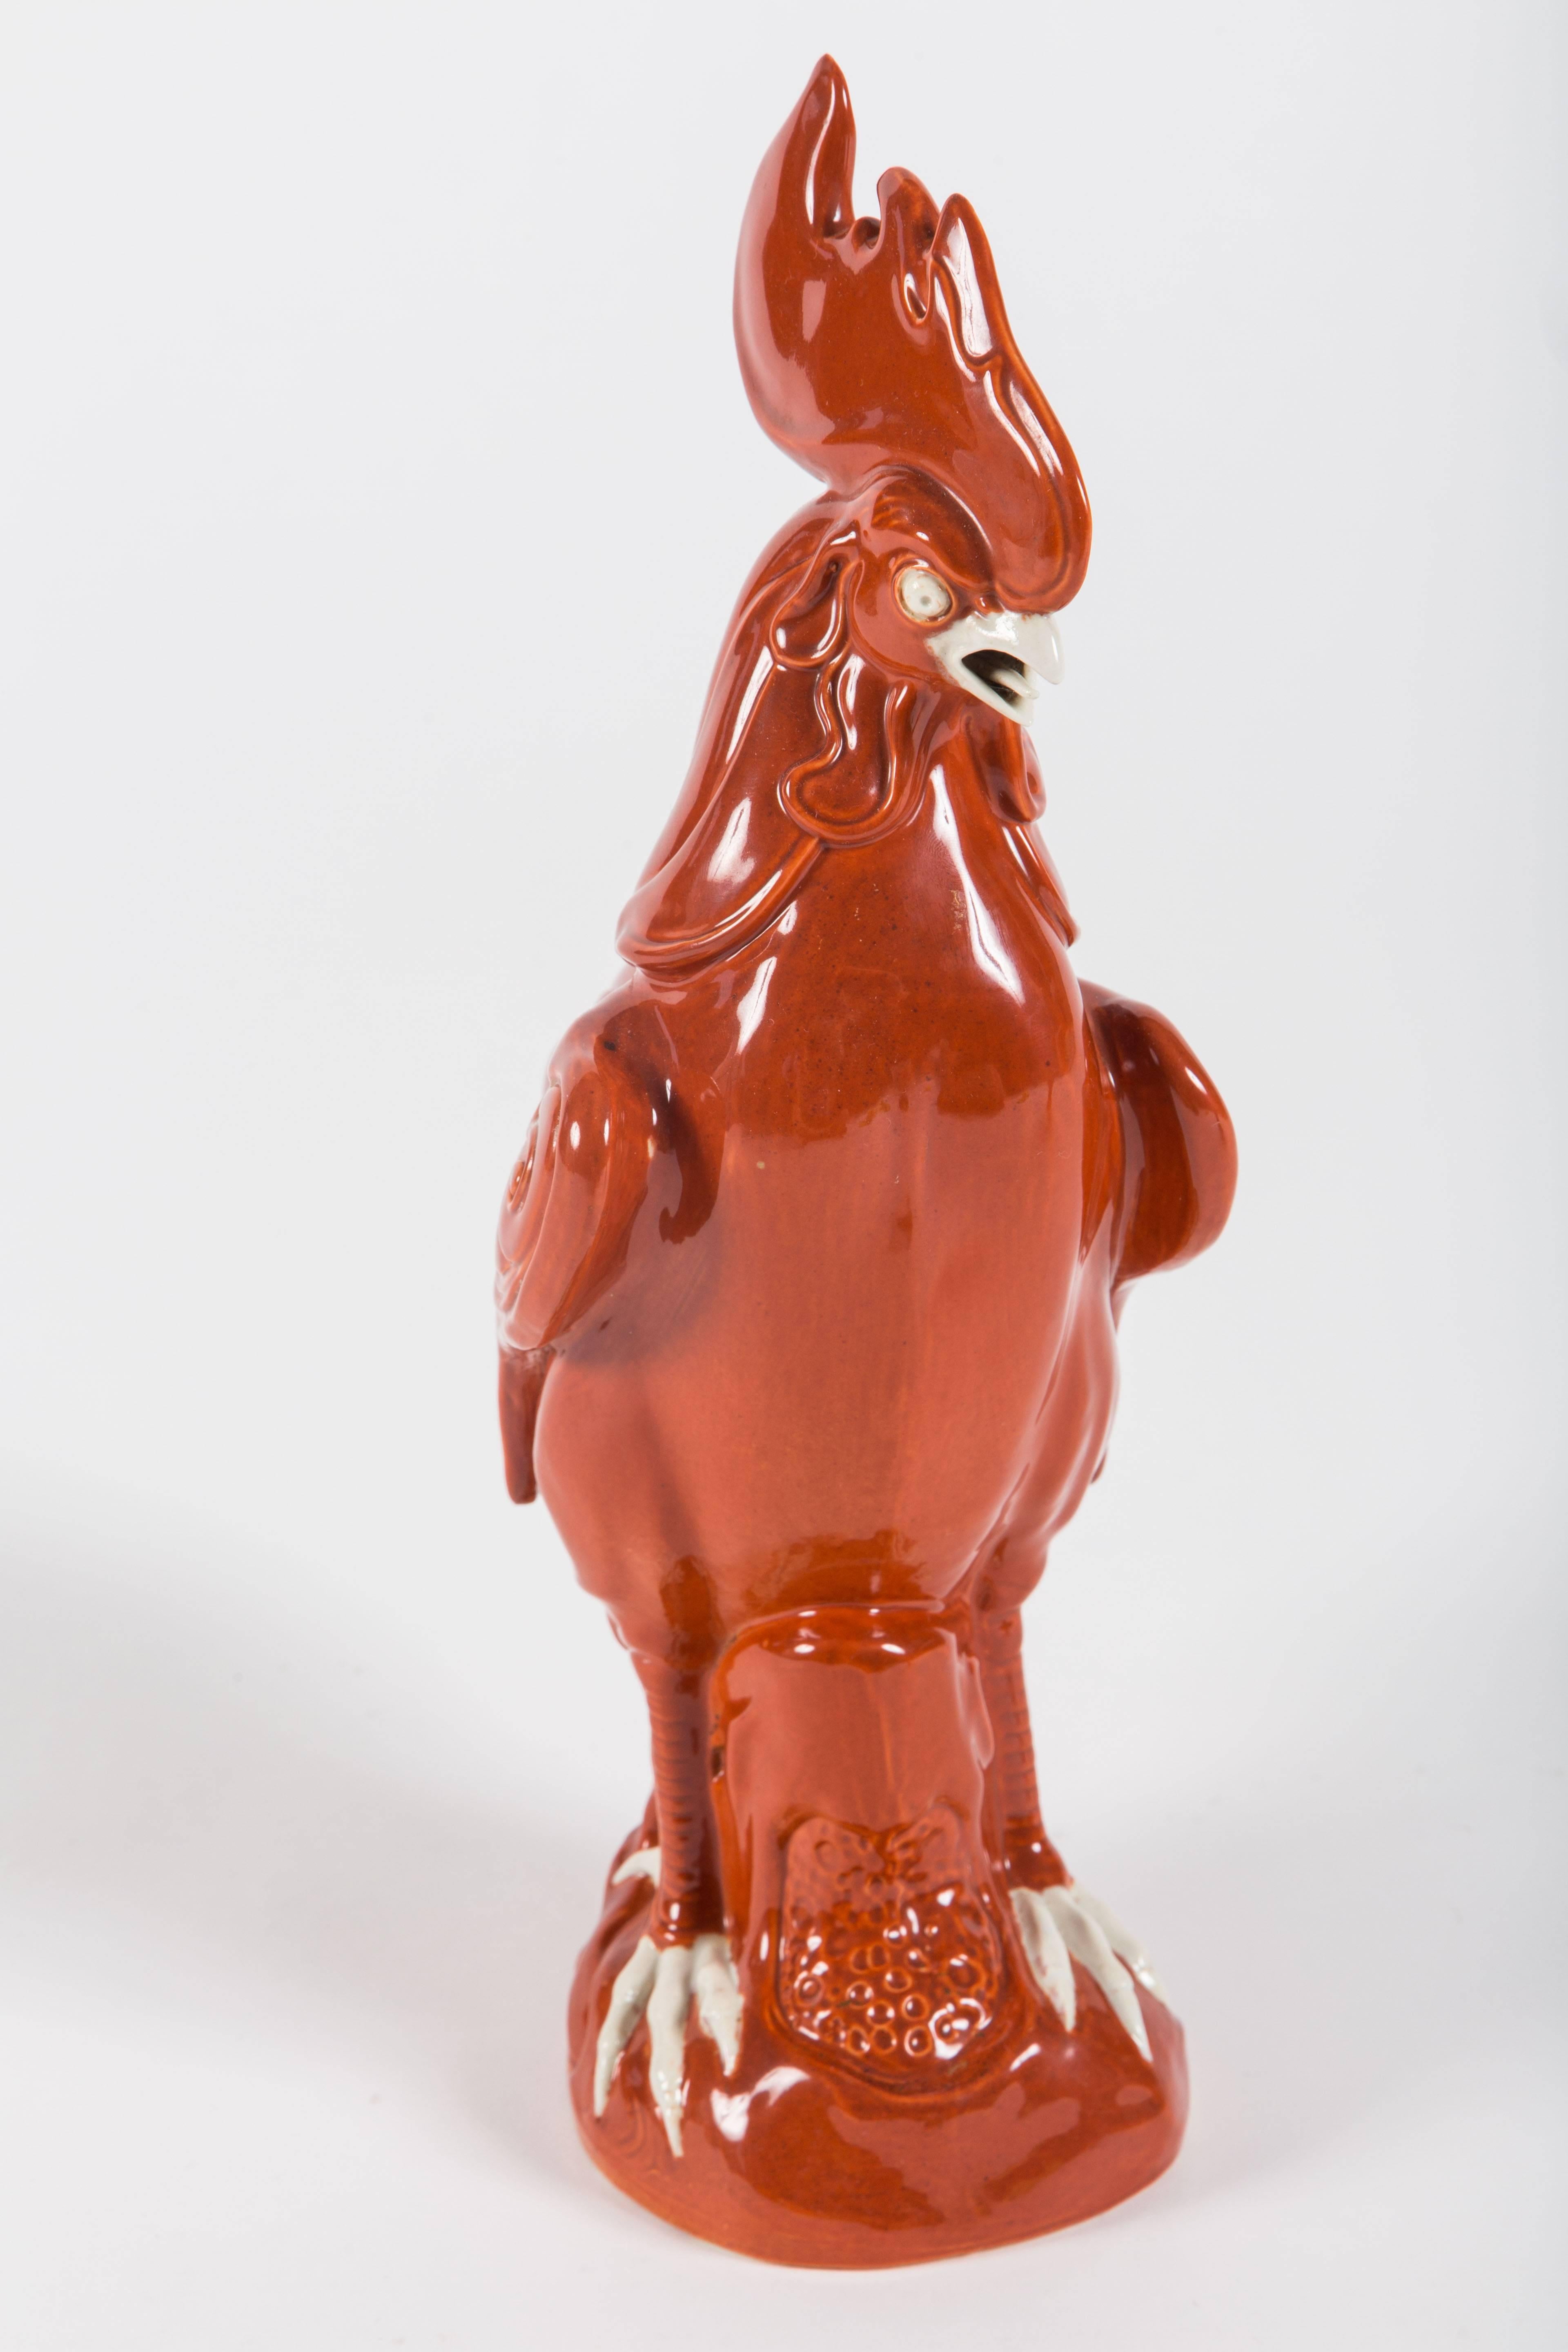 A striking pair of Chinese export porcelain roosters. Wonderfully detailed with feathers evoking flames, featuring a bright red and orange glazed finish, the pair is in excellent condition. Unique and original design.

Measures: 14 inches high.